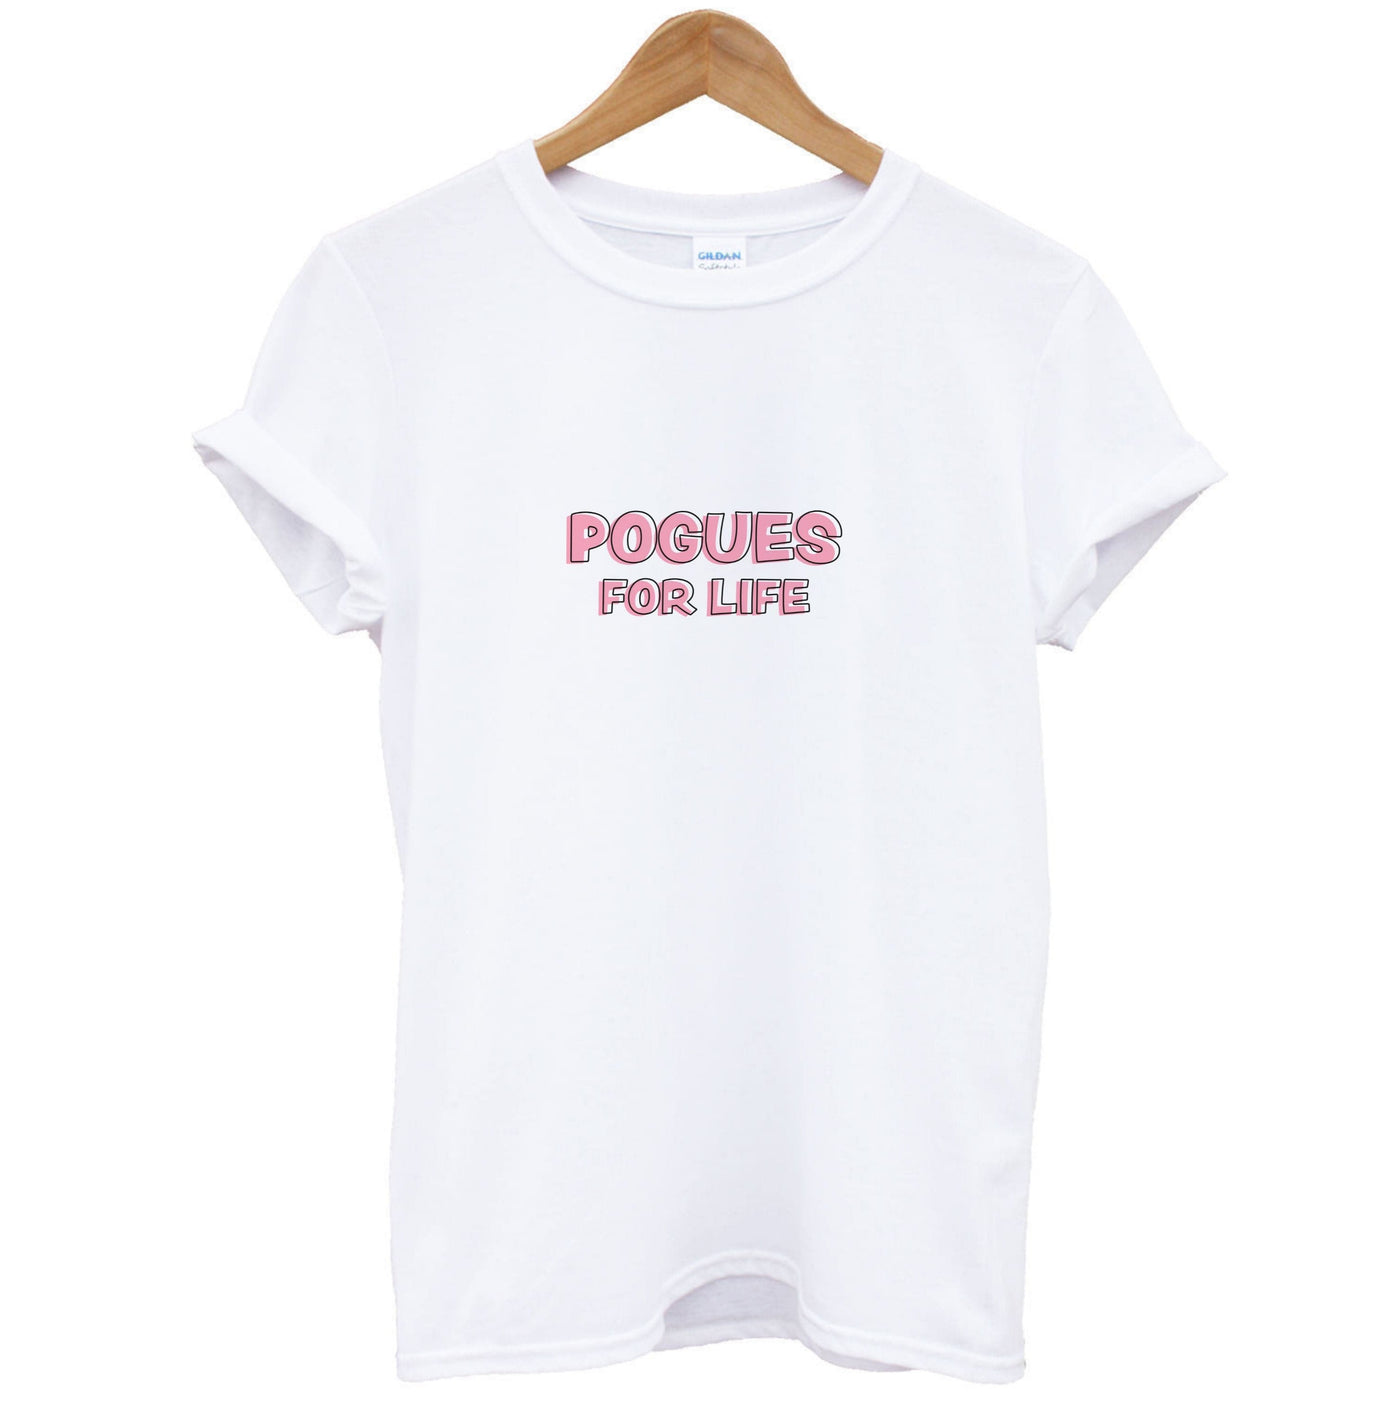 Pogues For Life - Outer Banks T-Shirt